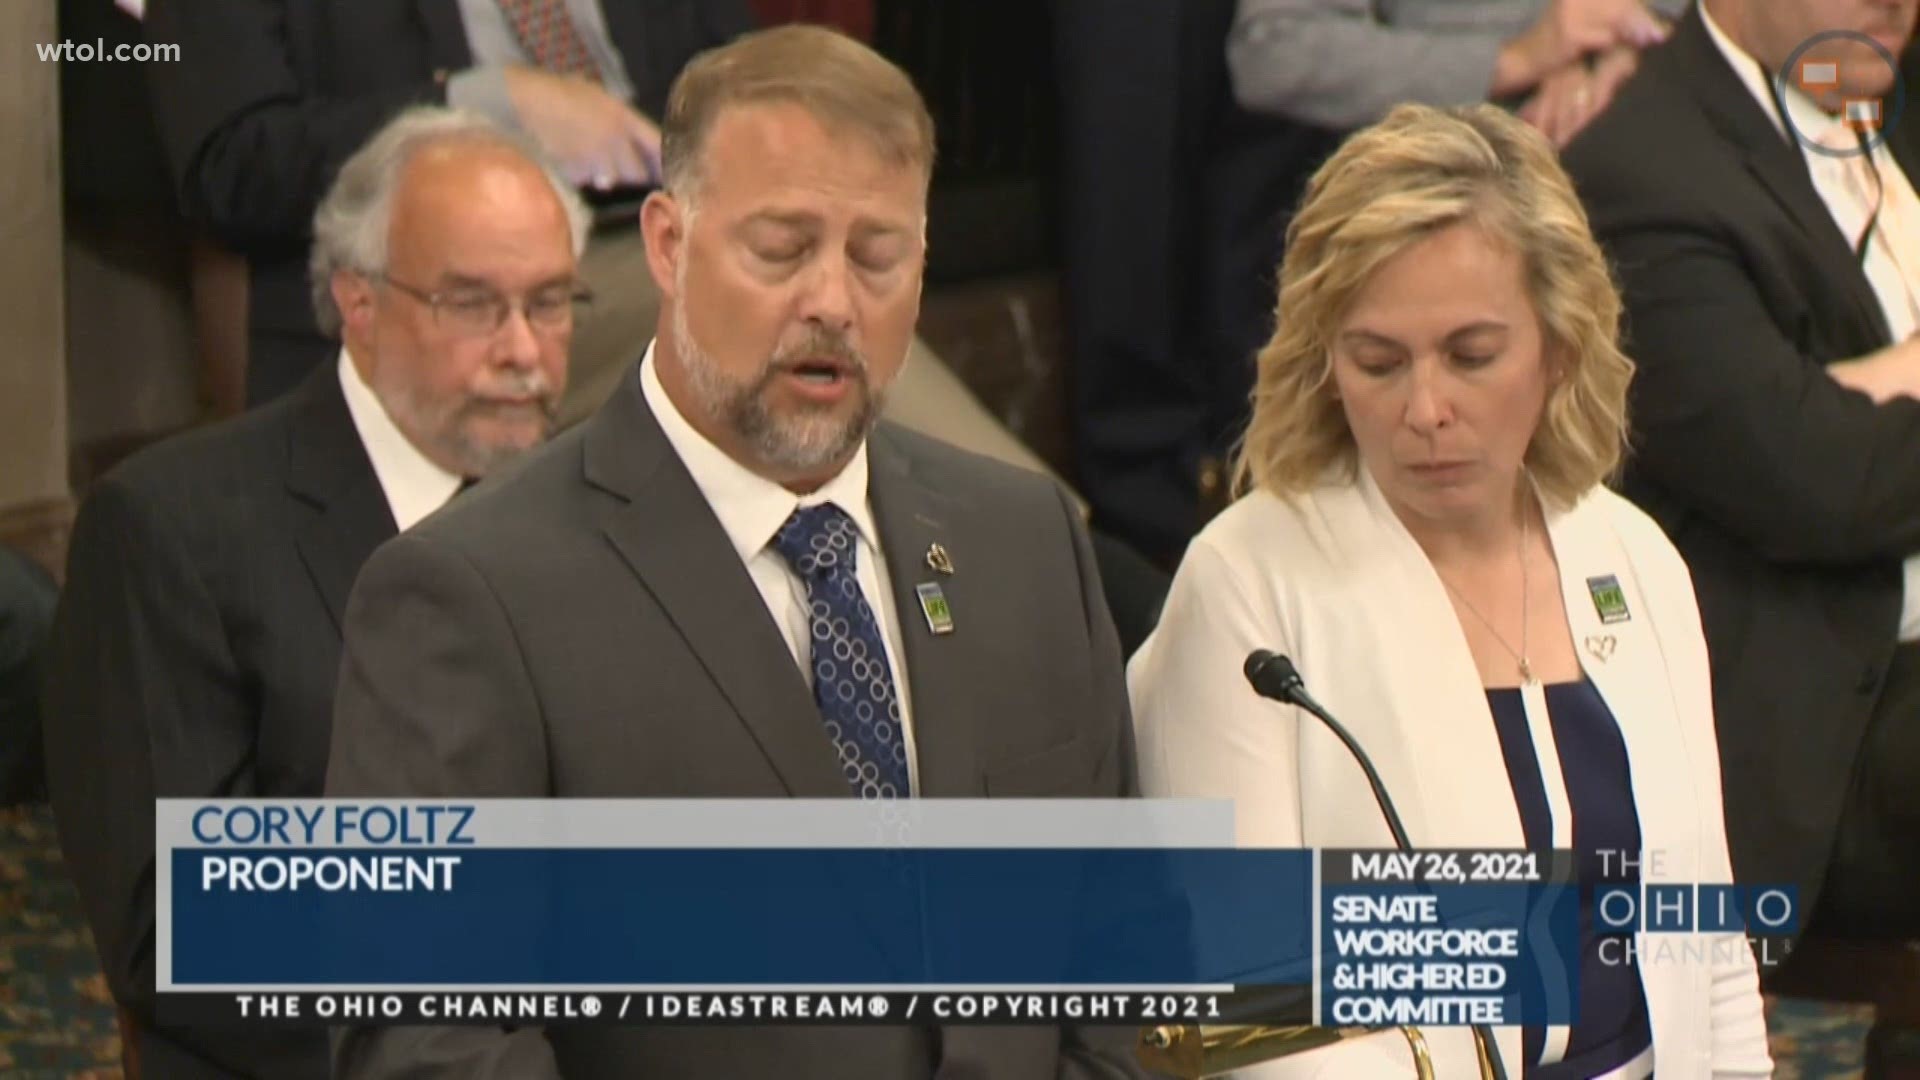 Shari and Cory Foltz, parents of Stone Foltz who died from a hazing incident at Bowling Green State University in March, plead with legislators to pass Collin's Law.